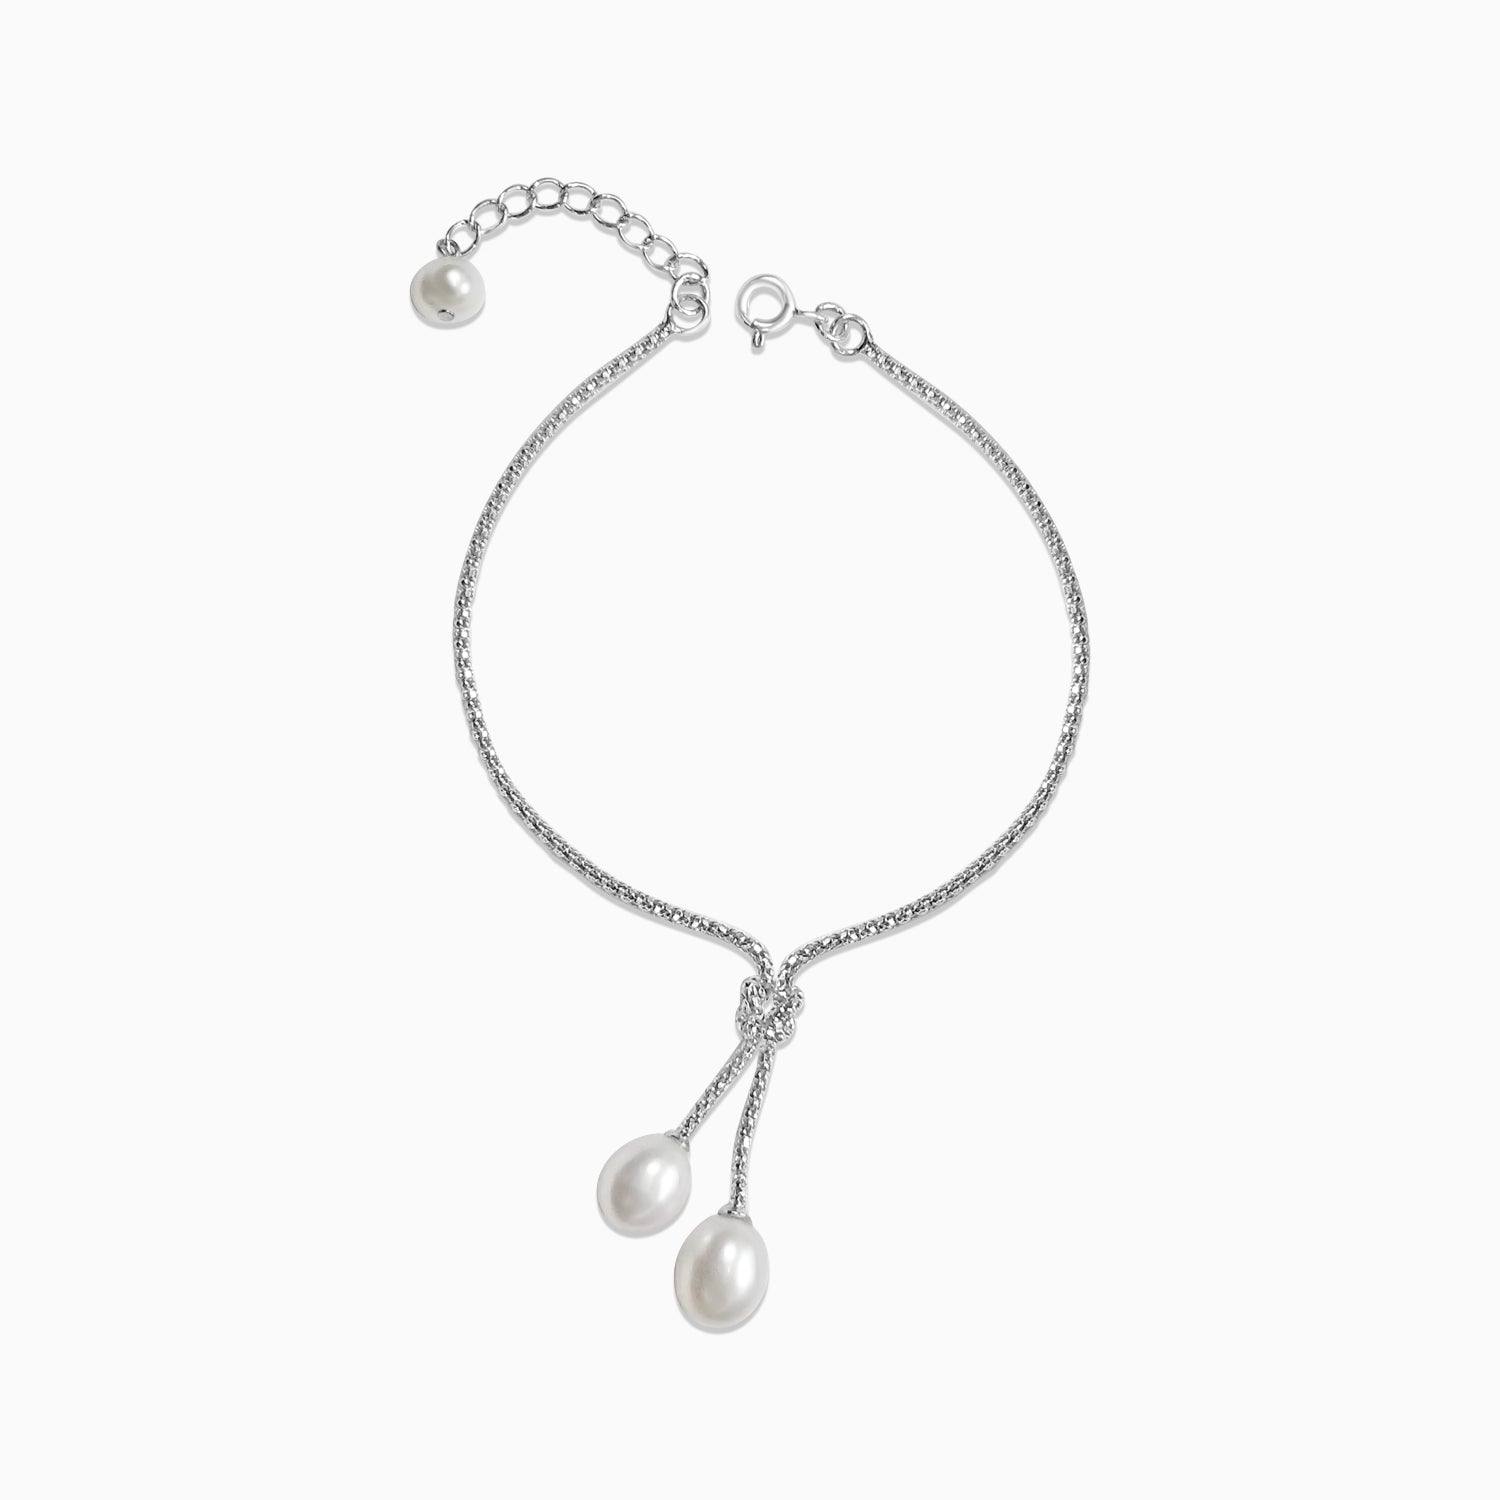 Silver Knotted Dangling Pearls Bracelet